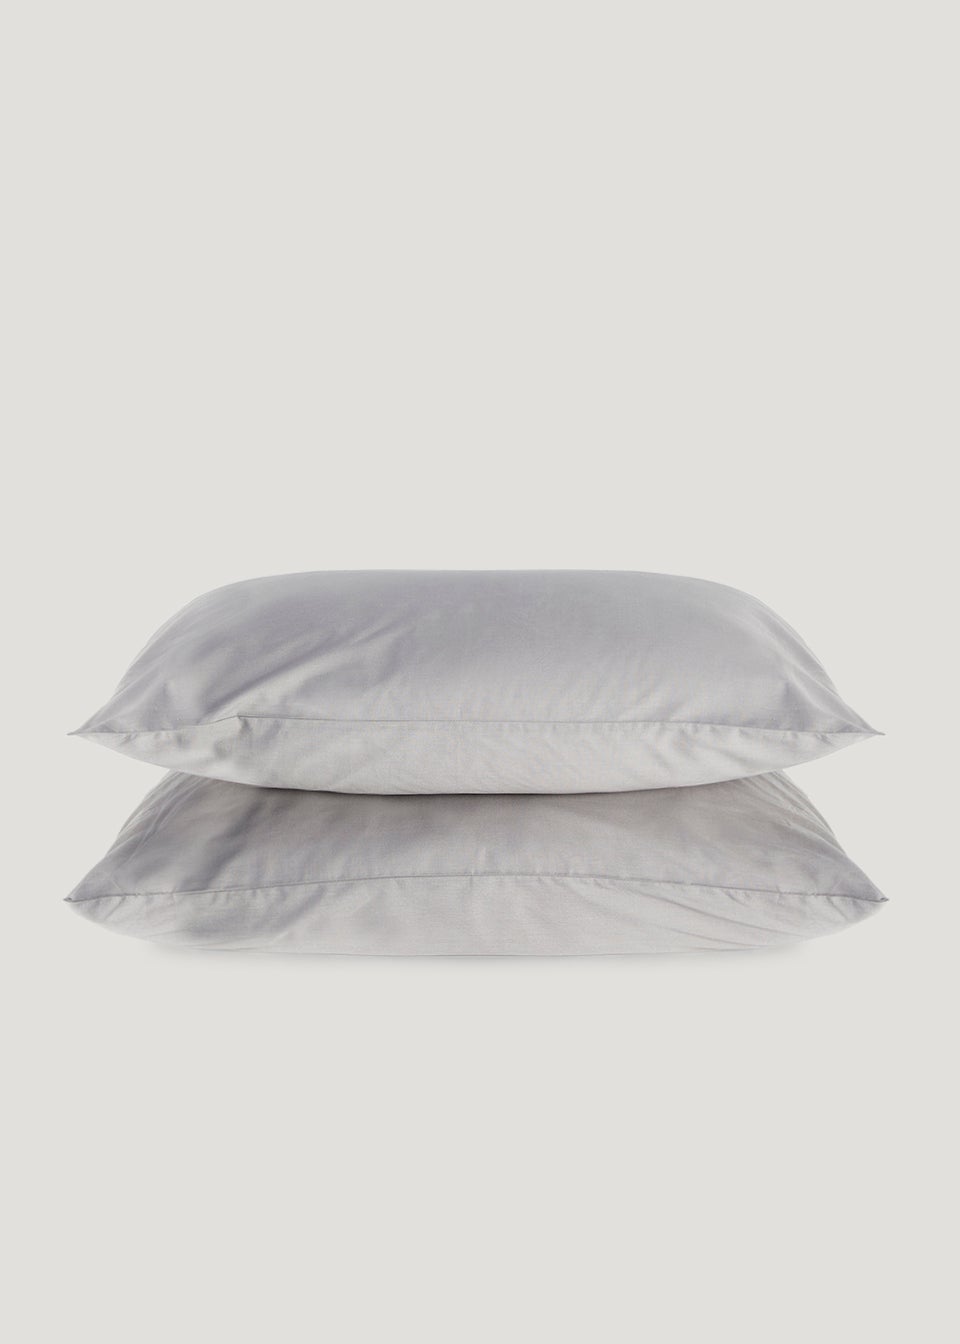 Grey Polycotton Housewife Pillowcase Pair (144 Thread Count)